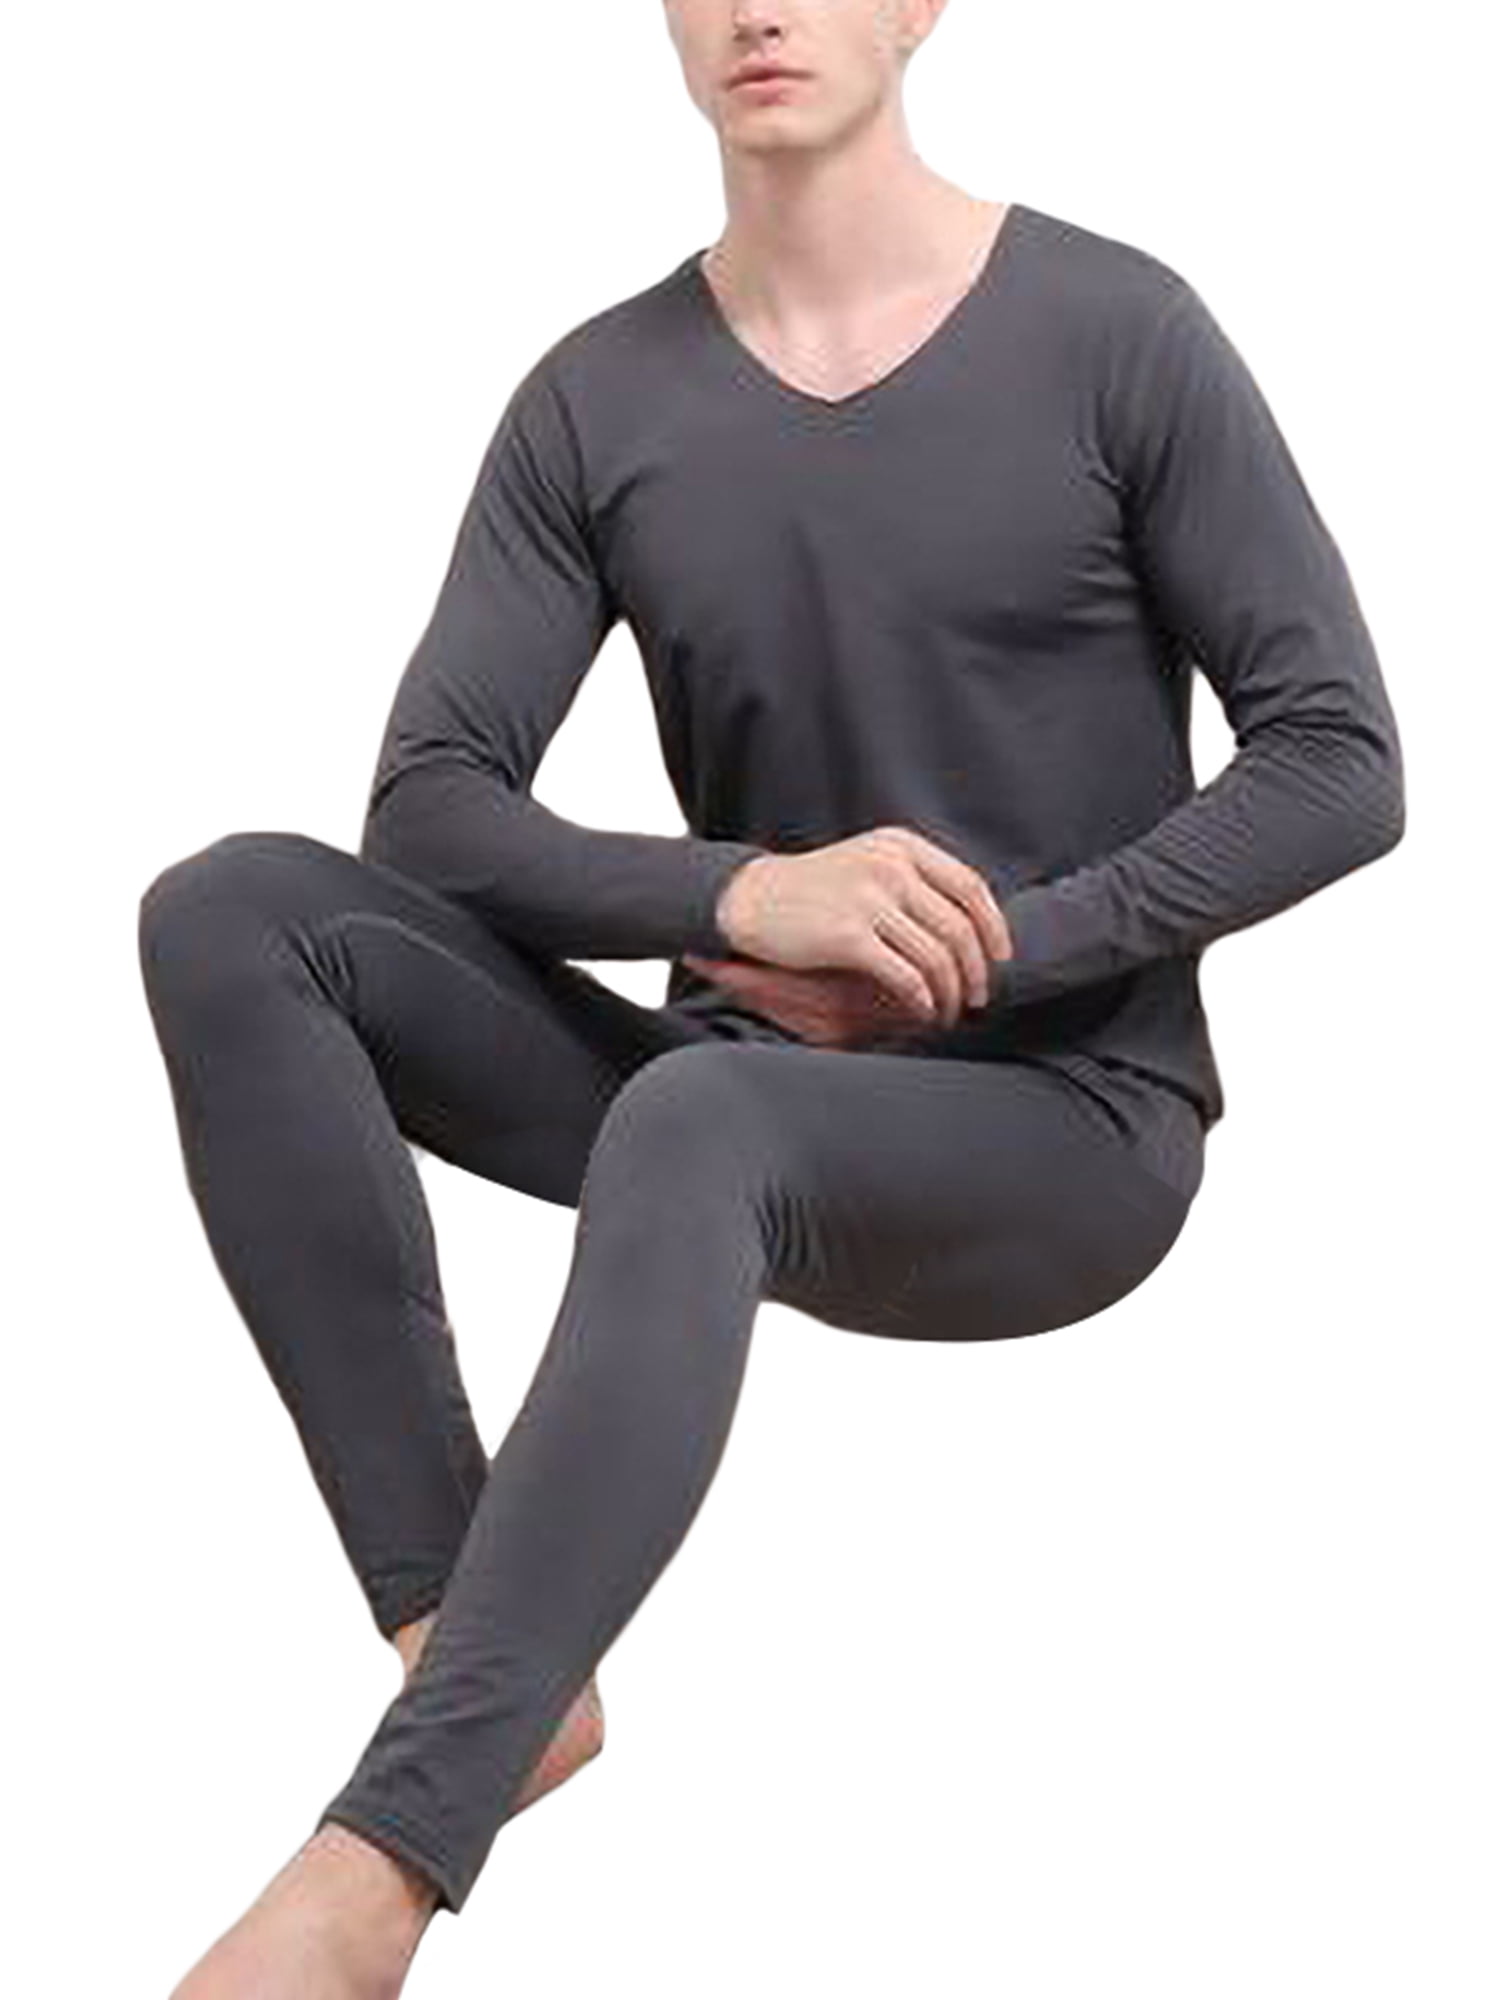 Men's Thermal Underwear Long Johns Set with Fleece Lined